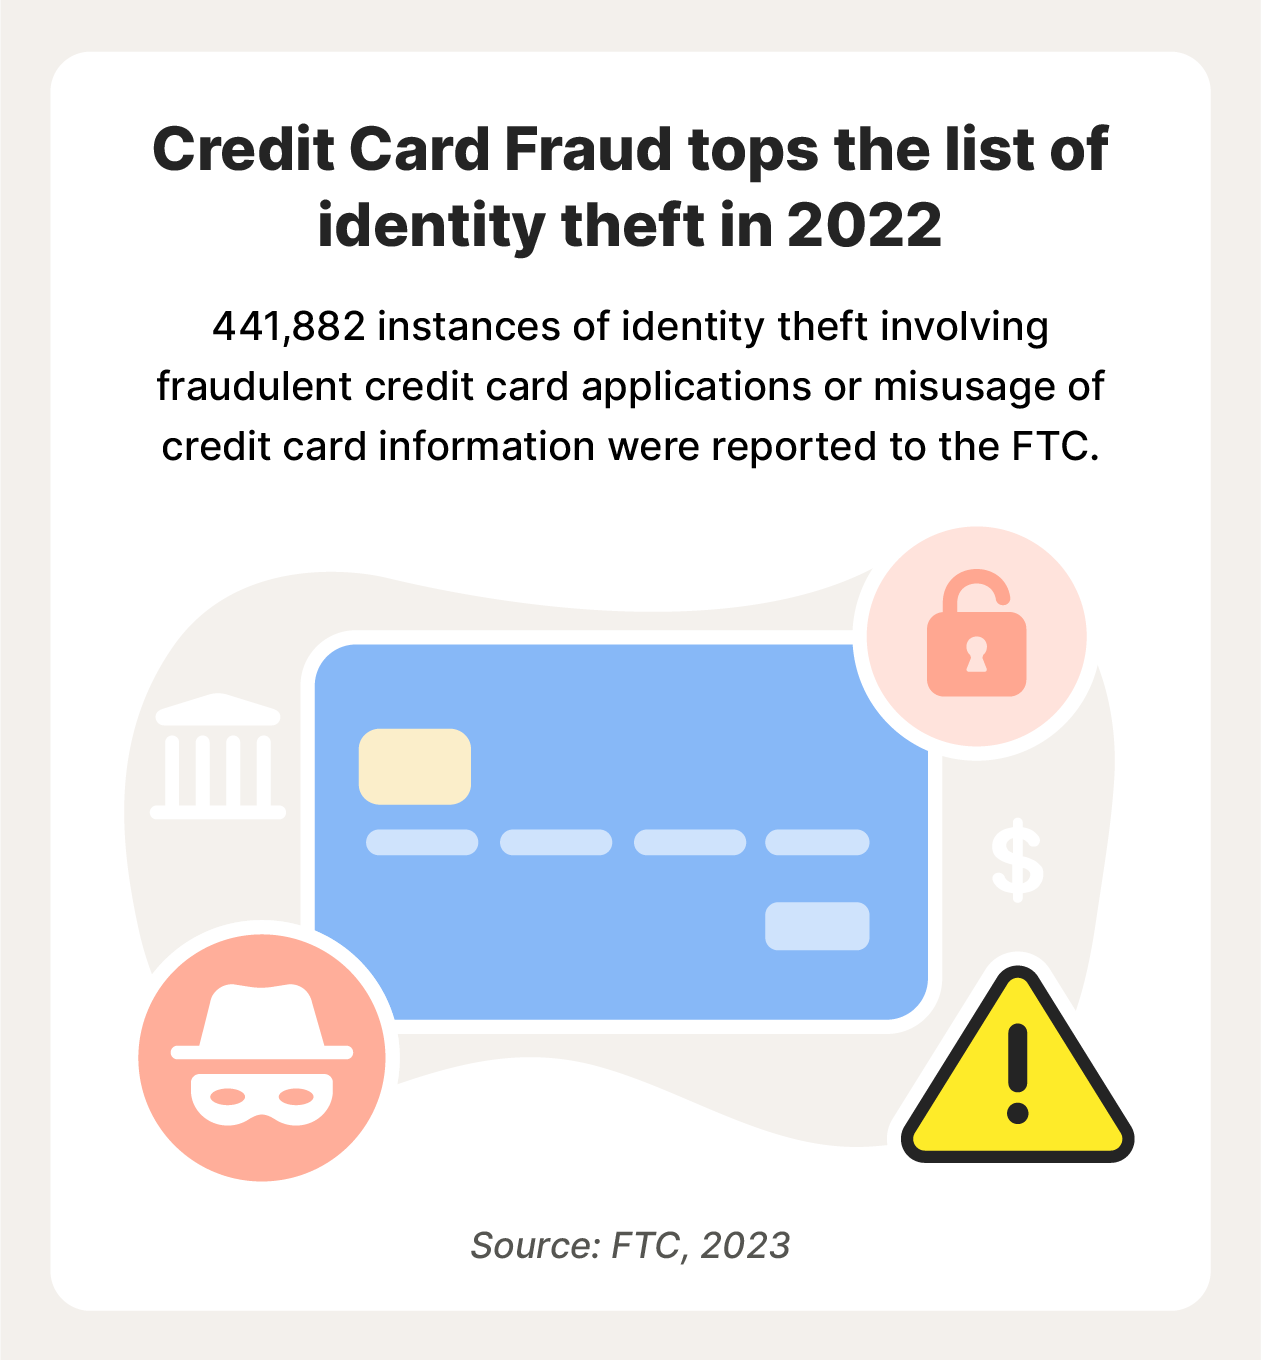 Credit card fraud is among the most common types of identity theft.